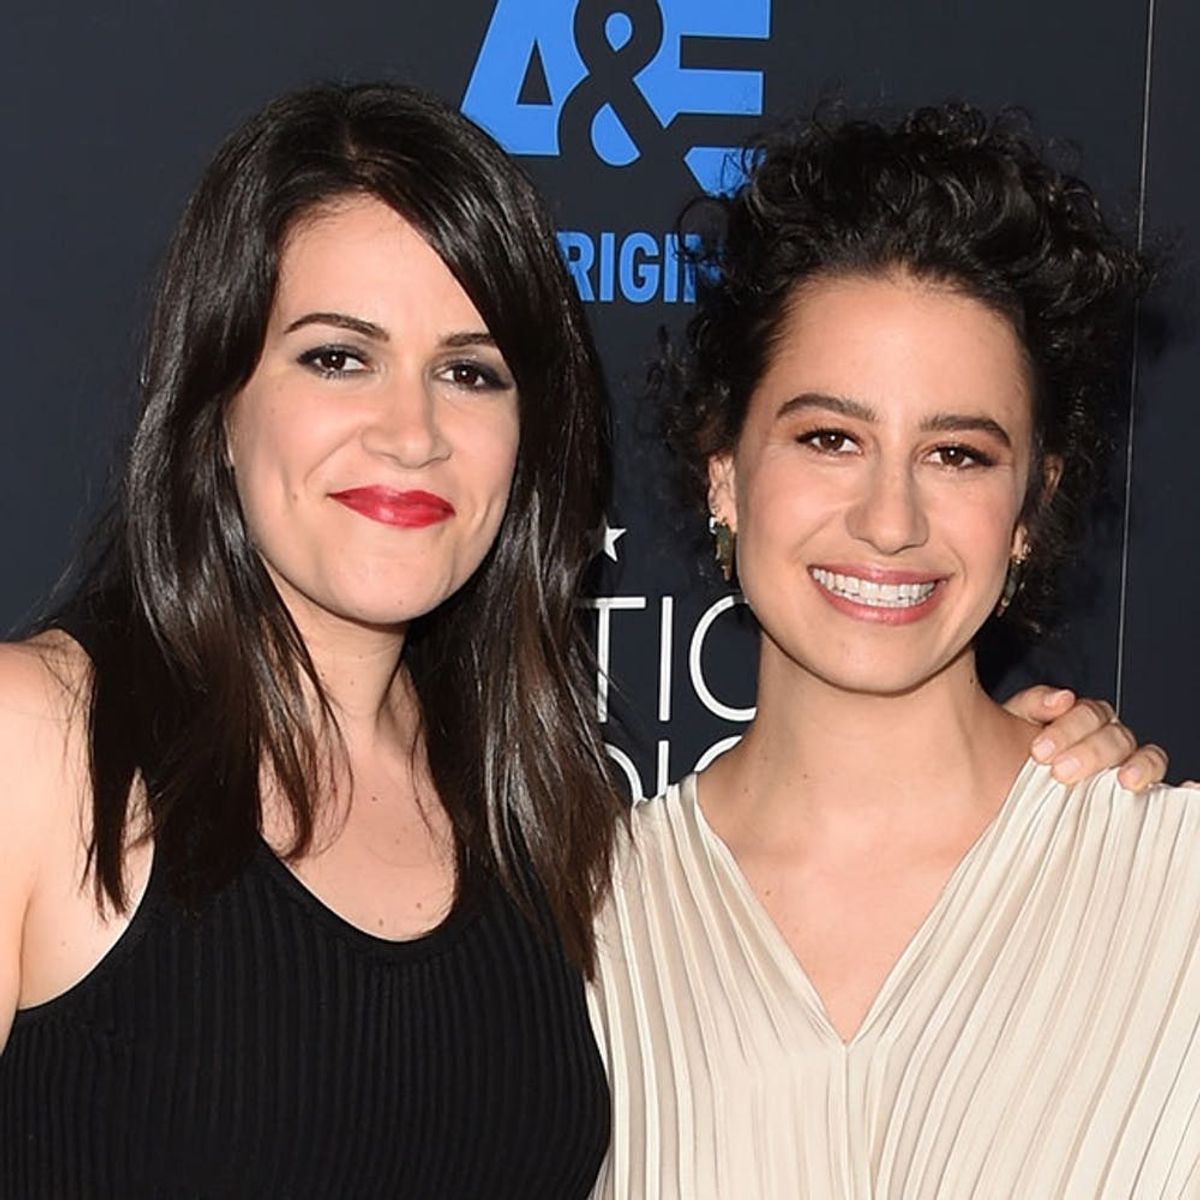 The Stars of Broad City Just Debuted Hilarious BFF Halloween Costumes